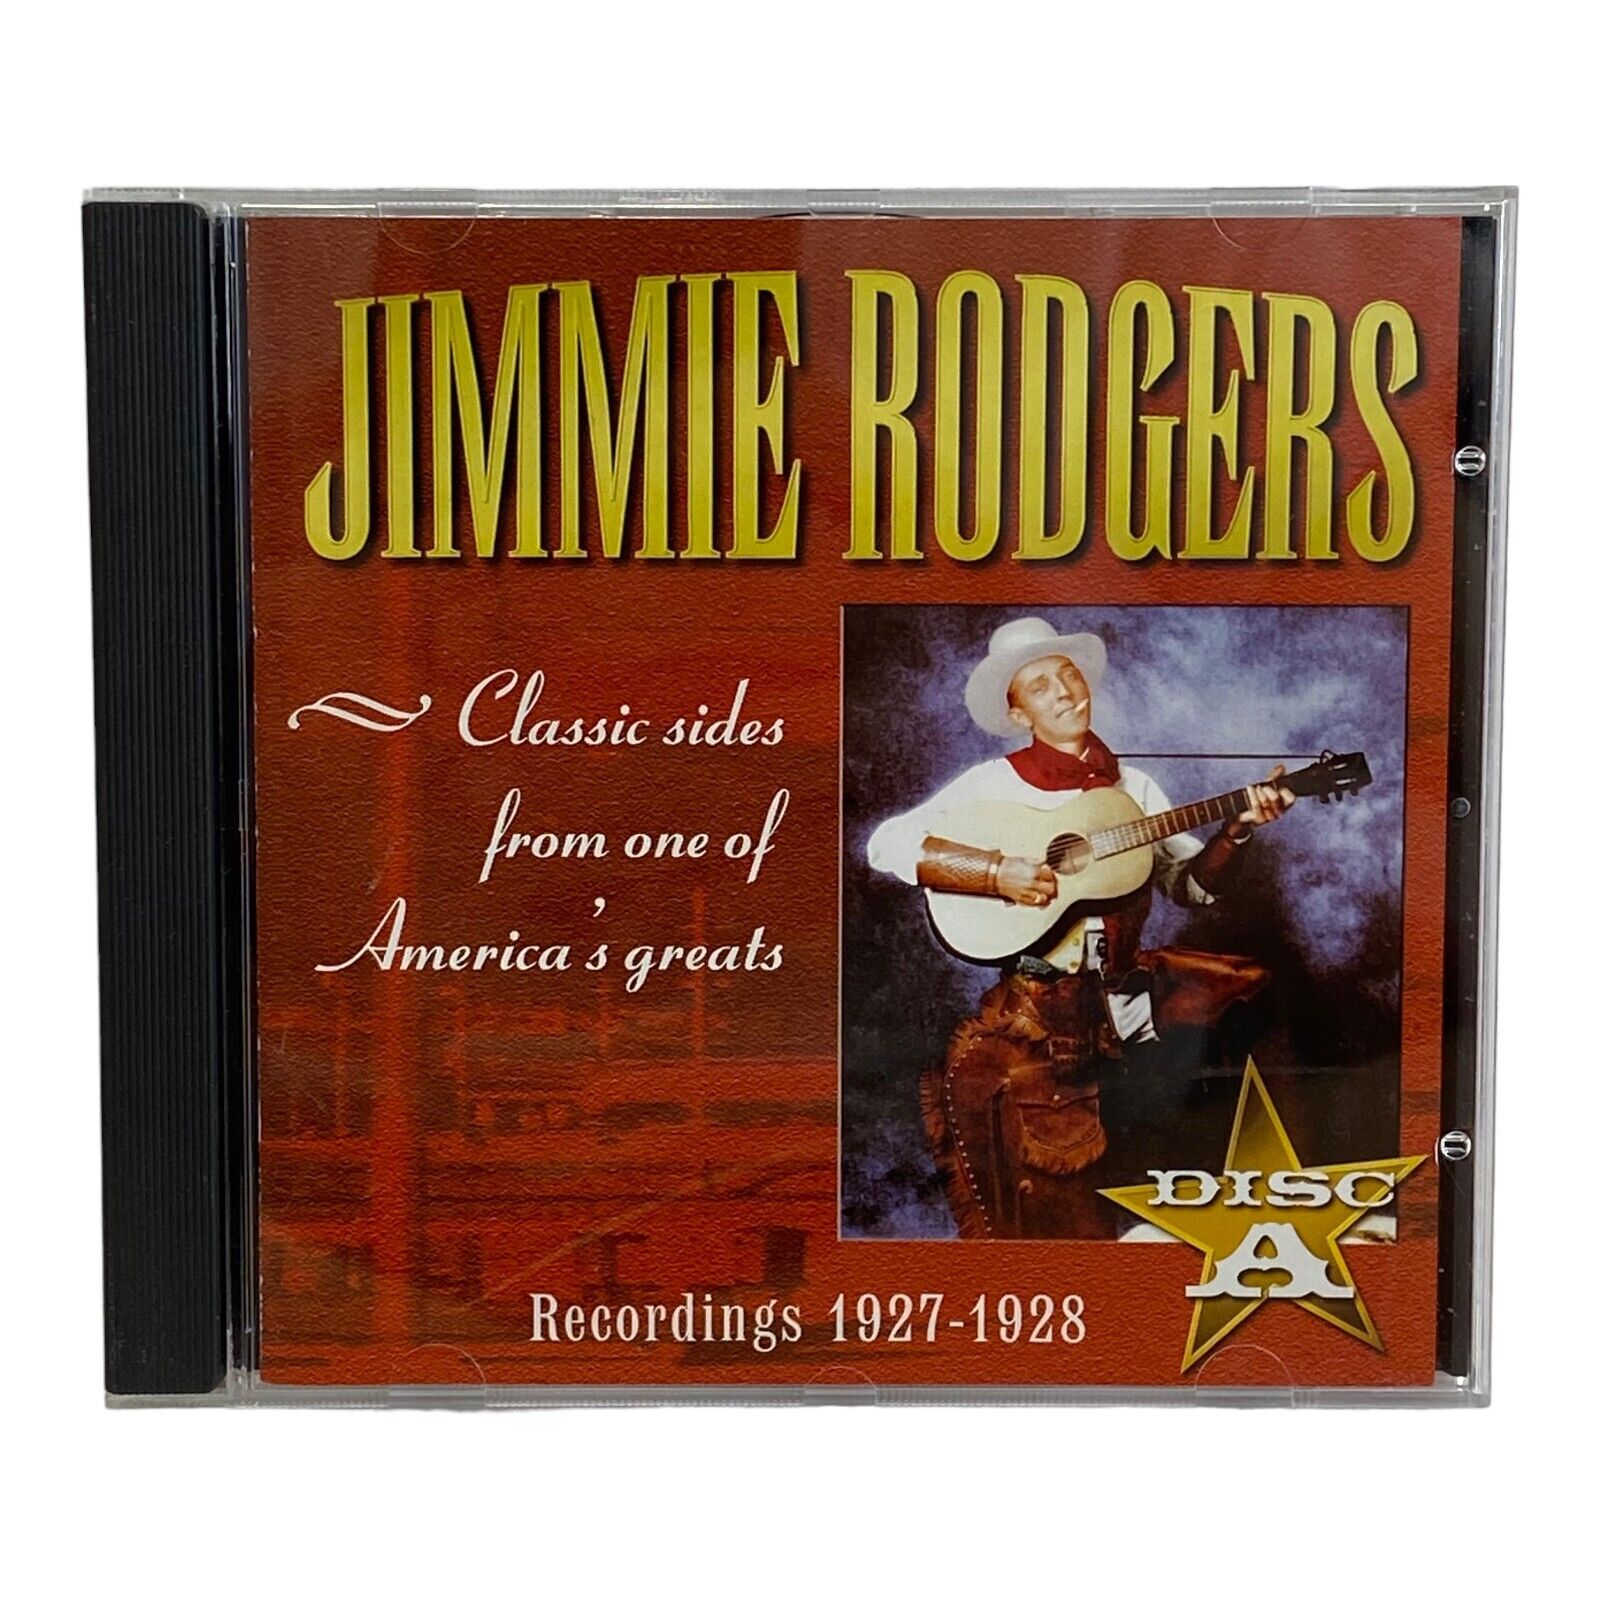 Jimmie Rodgers: Recordings 1927-1928 (CD, 2002 JSP ) Folk, Country